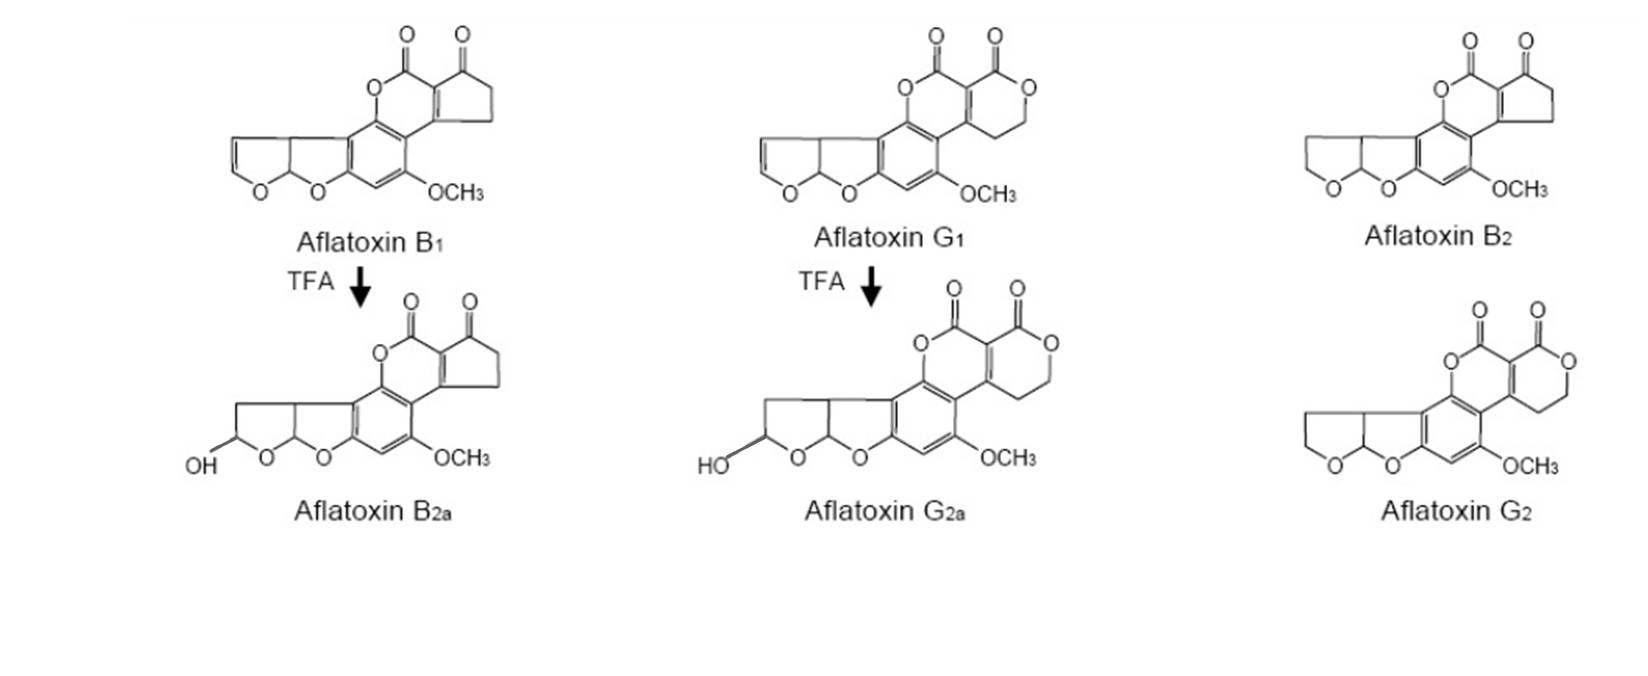 Derivatization of aflatoxin B1 and G1 by trifluoroacetic acid.